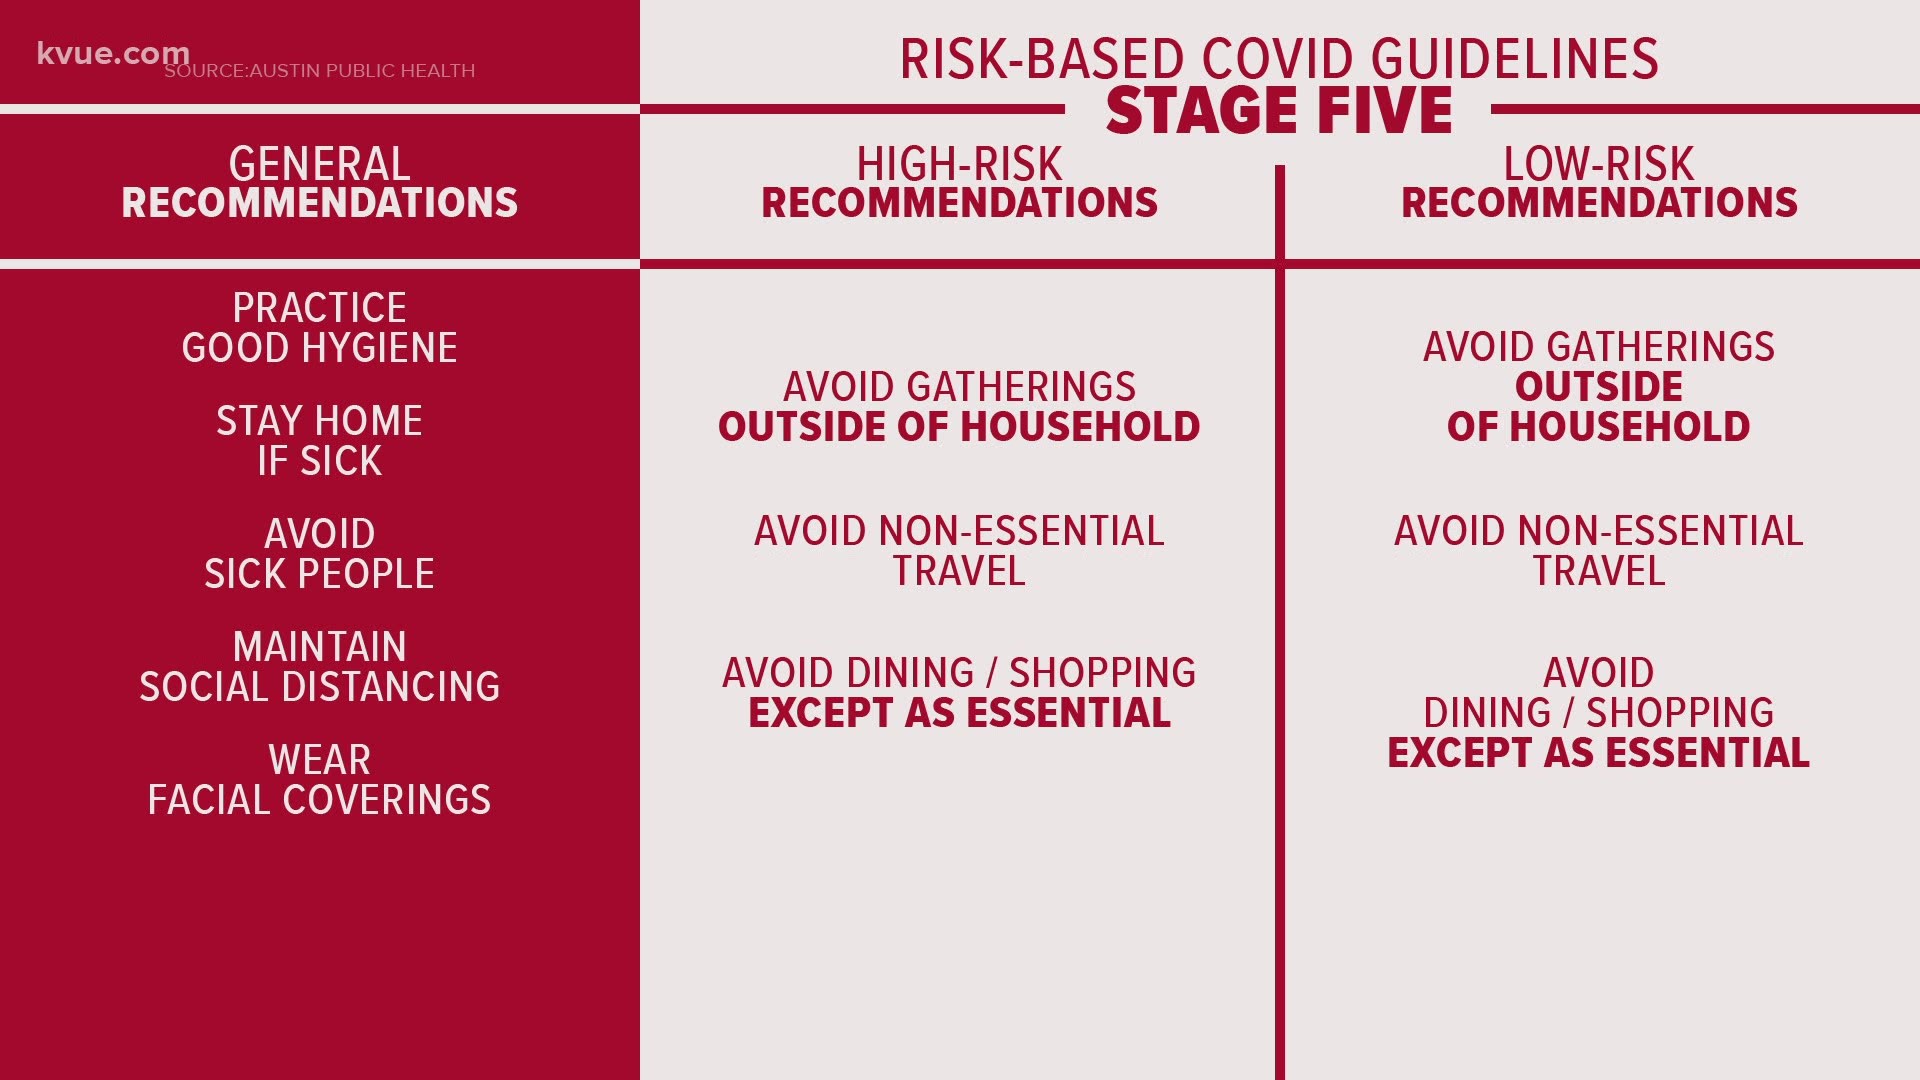 Austin is now officially in Stage 5 of the risk-based guidelines. Here's what that means.